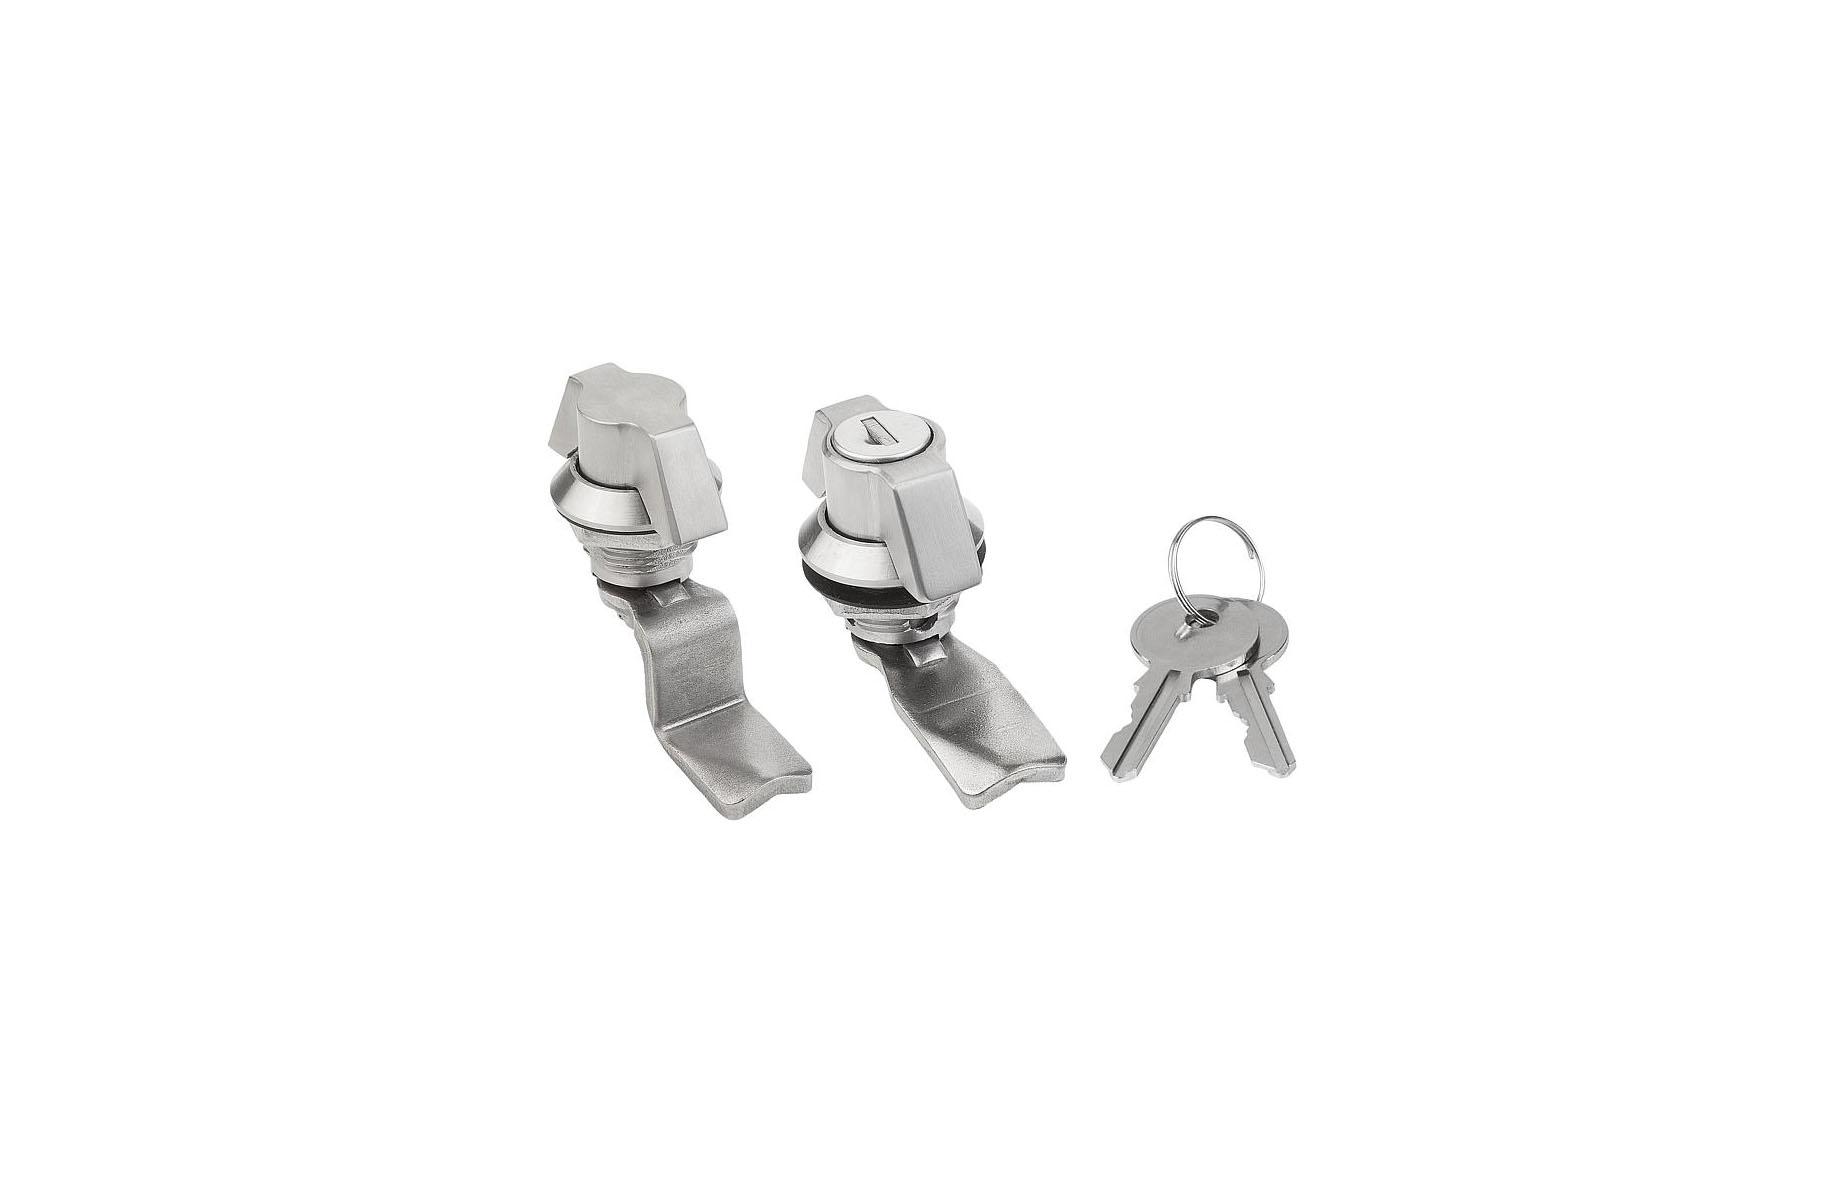 K1108 Quarter-turn locks, stainless steel with wing grip